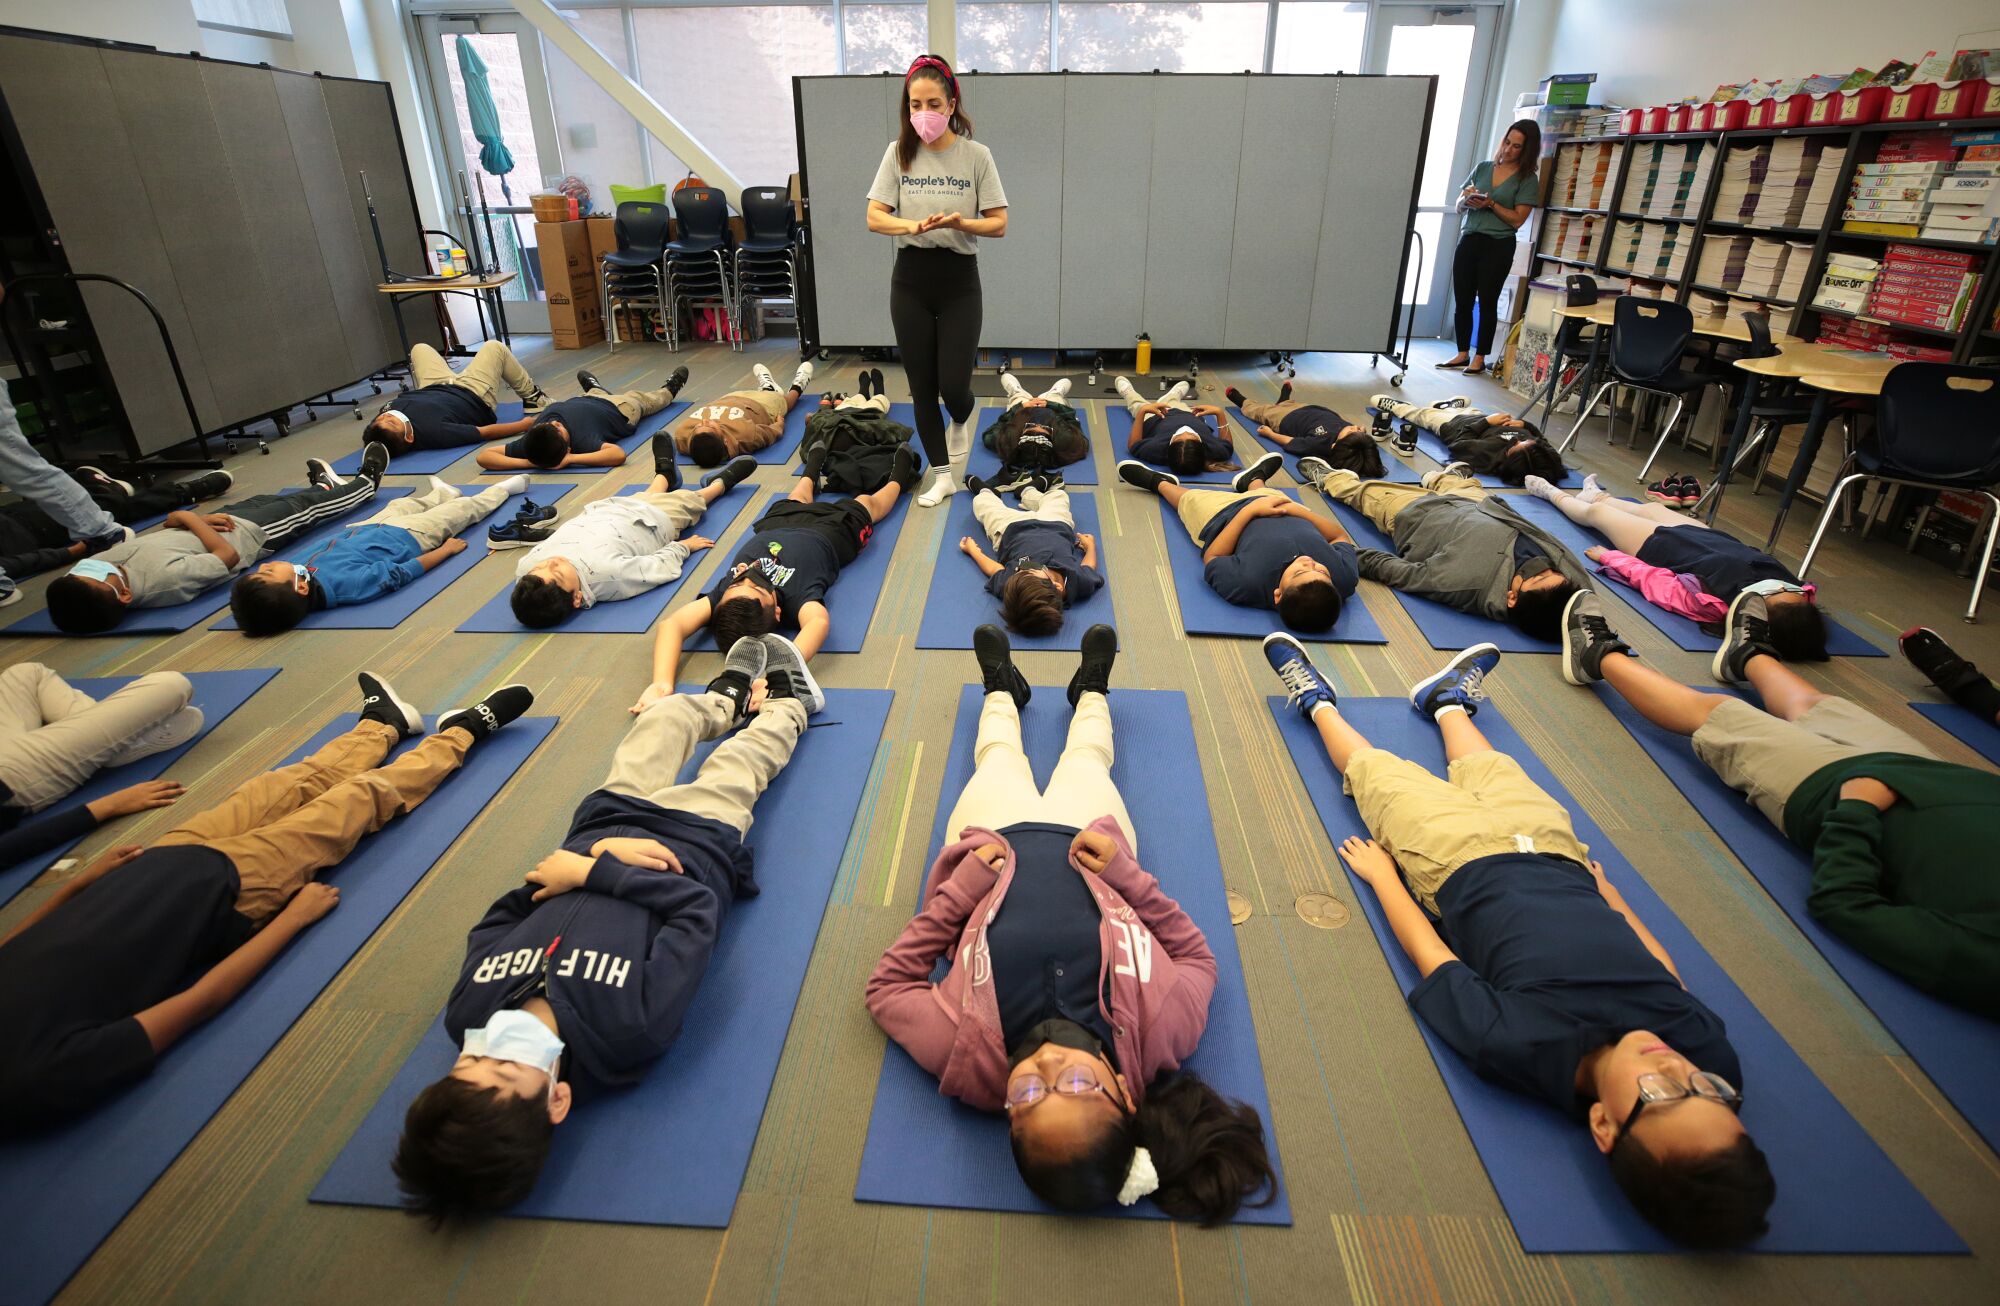 Leah Gallegos, a co-founder of People's Yoga is leading the 5th grade class at Accelerated Charter Elementary School 